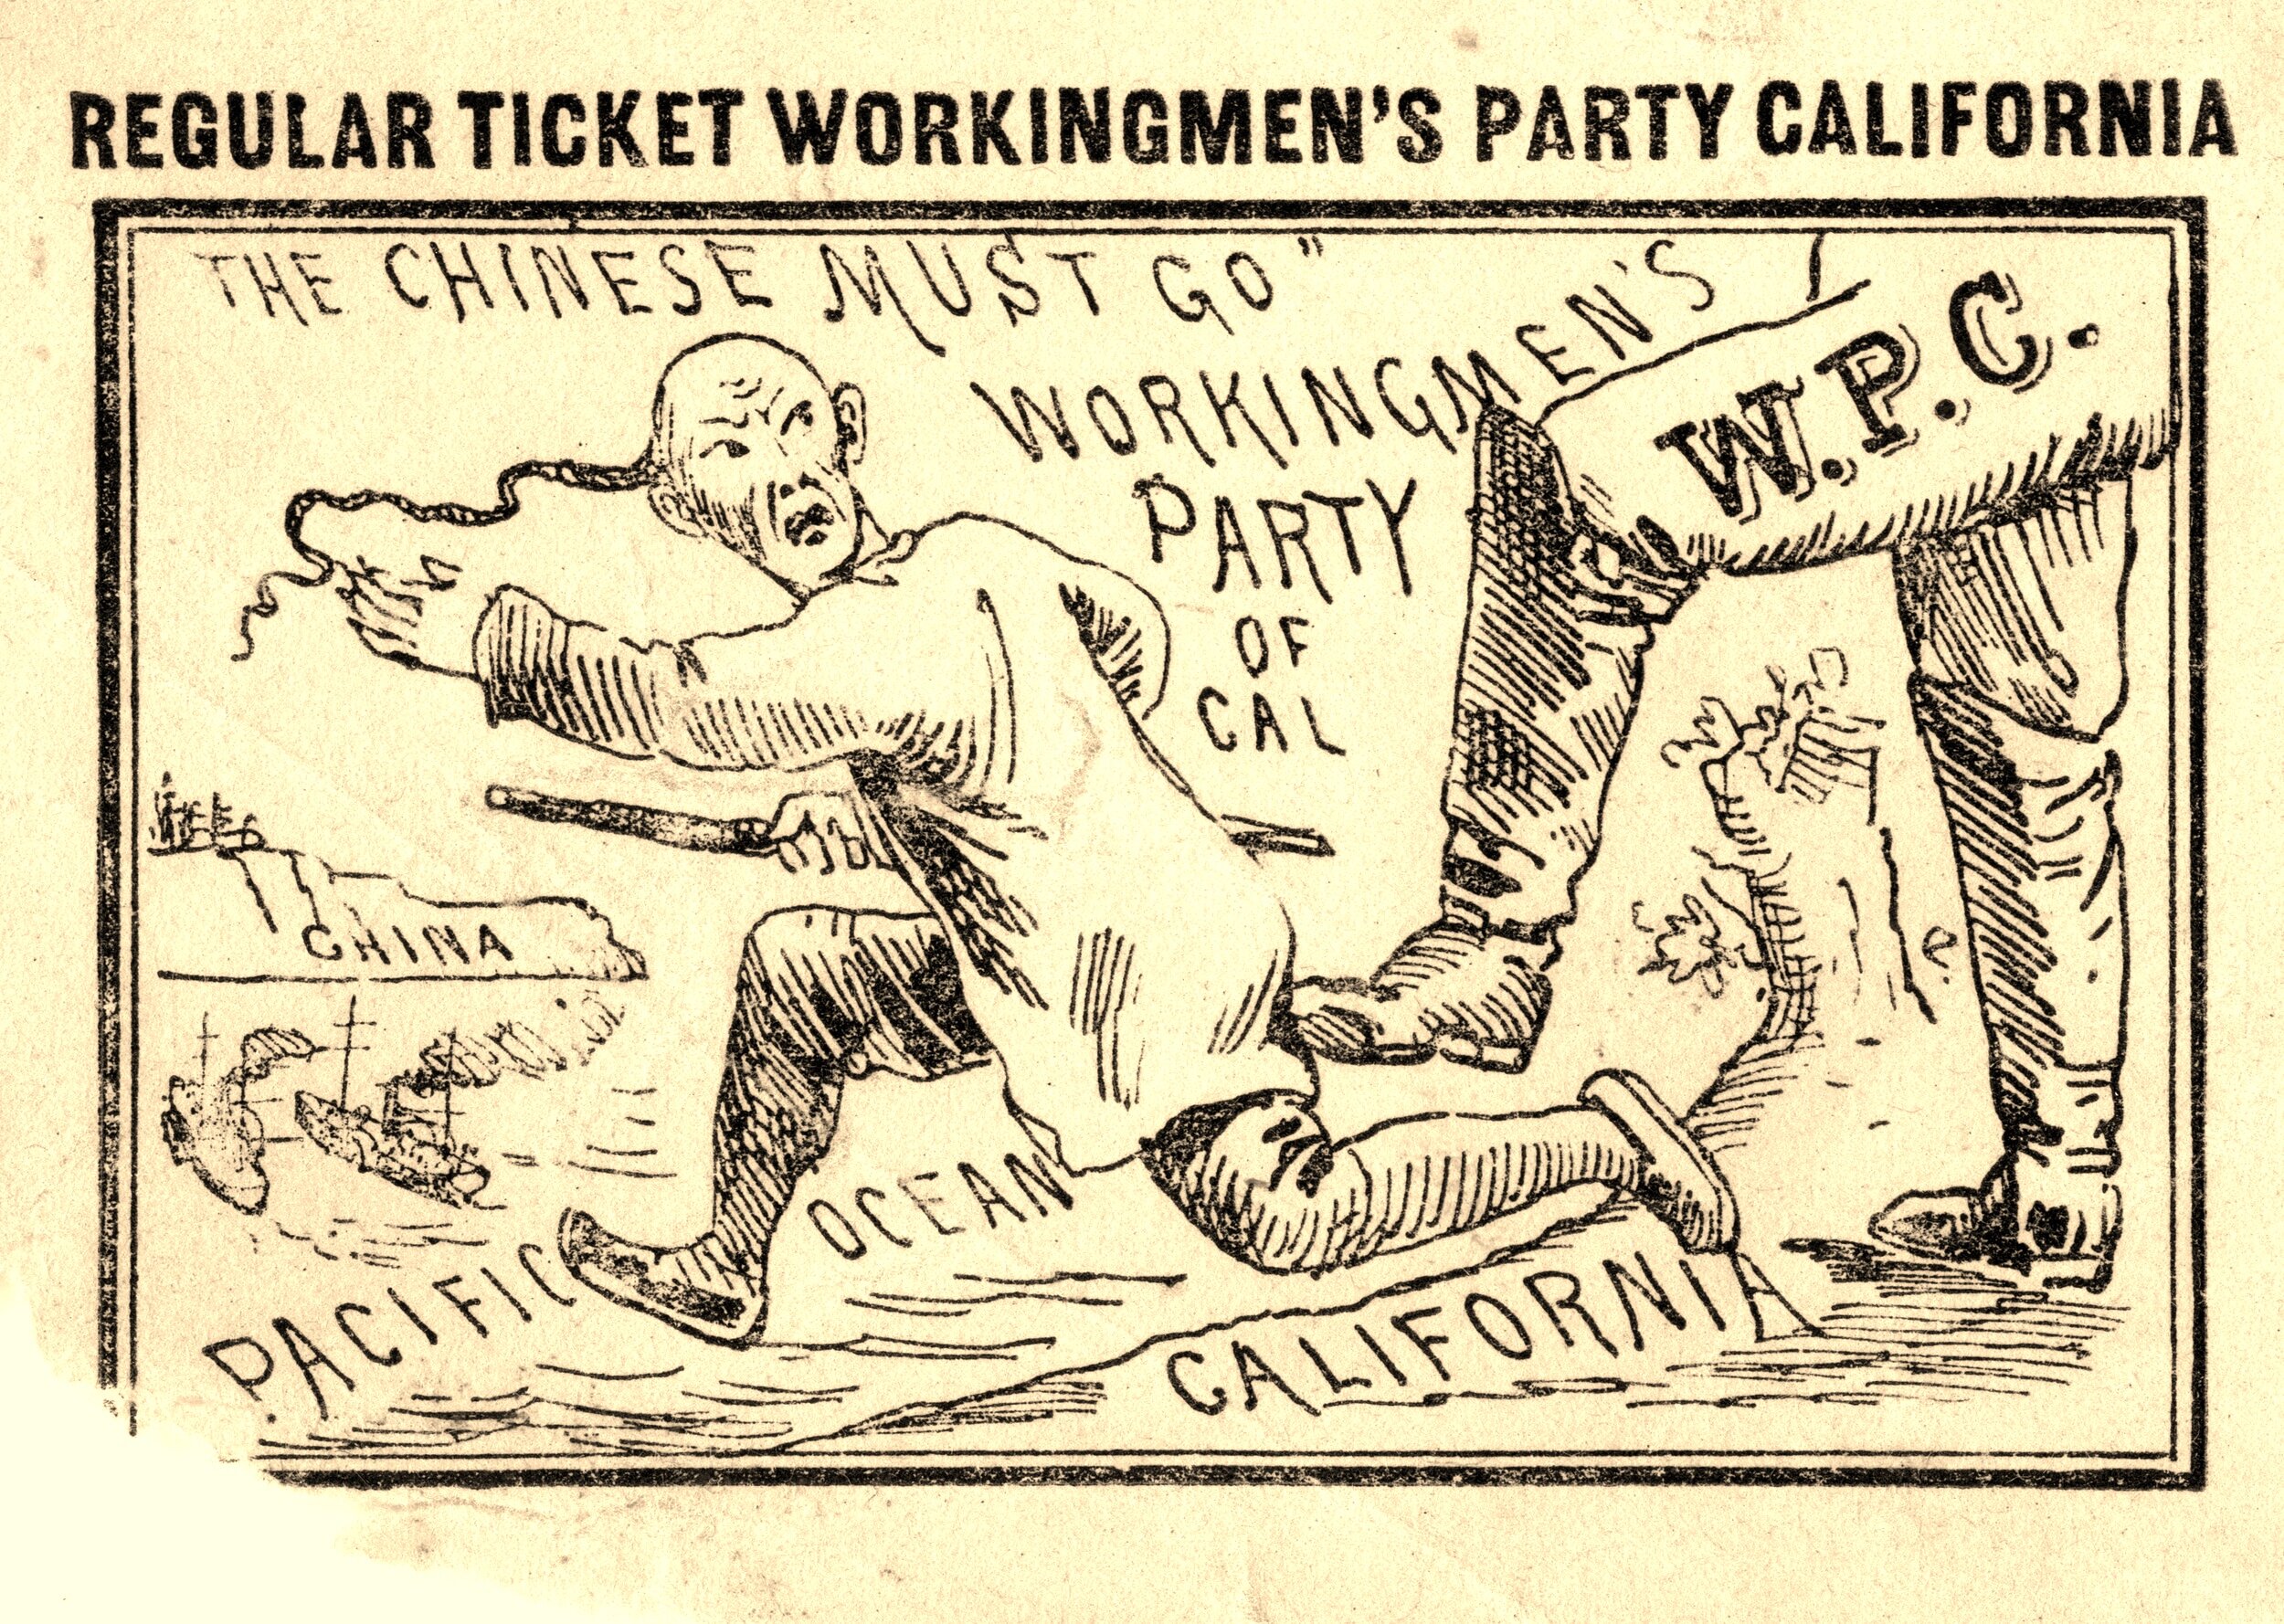  Racism and xenophobia have also colored the relationship. This is a document from the California Workingmen’s Party in the mid-1800s. The American working class has always feared Chinese labor.  